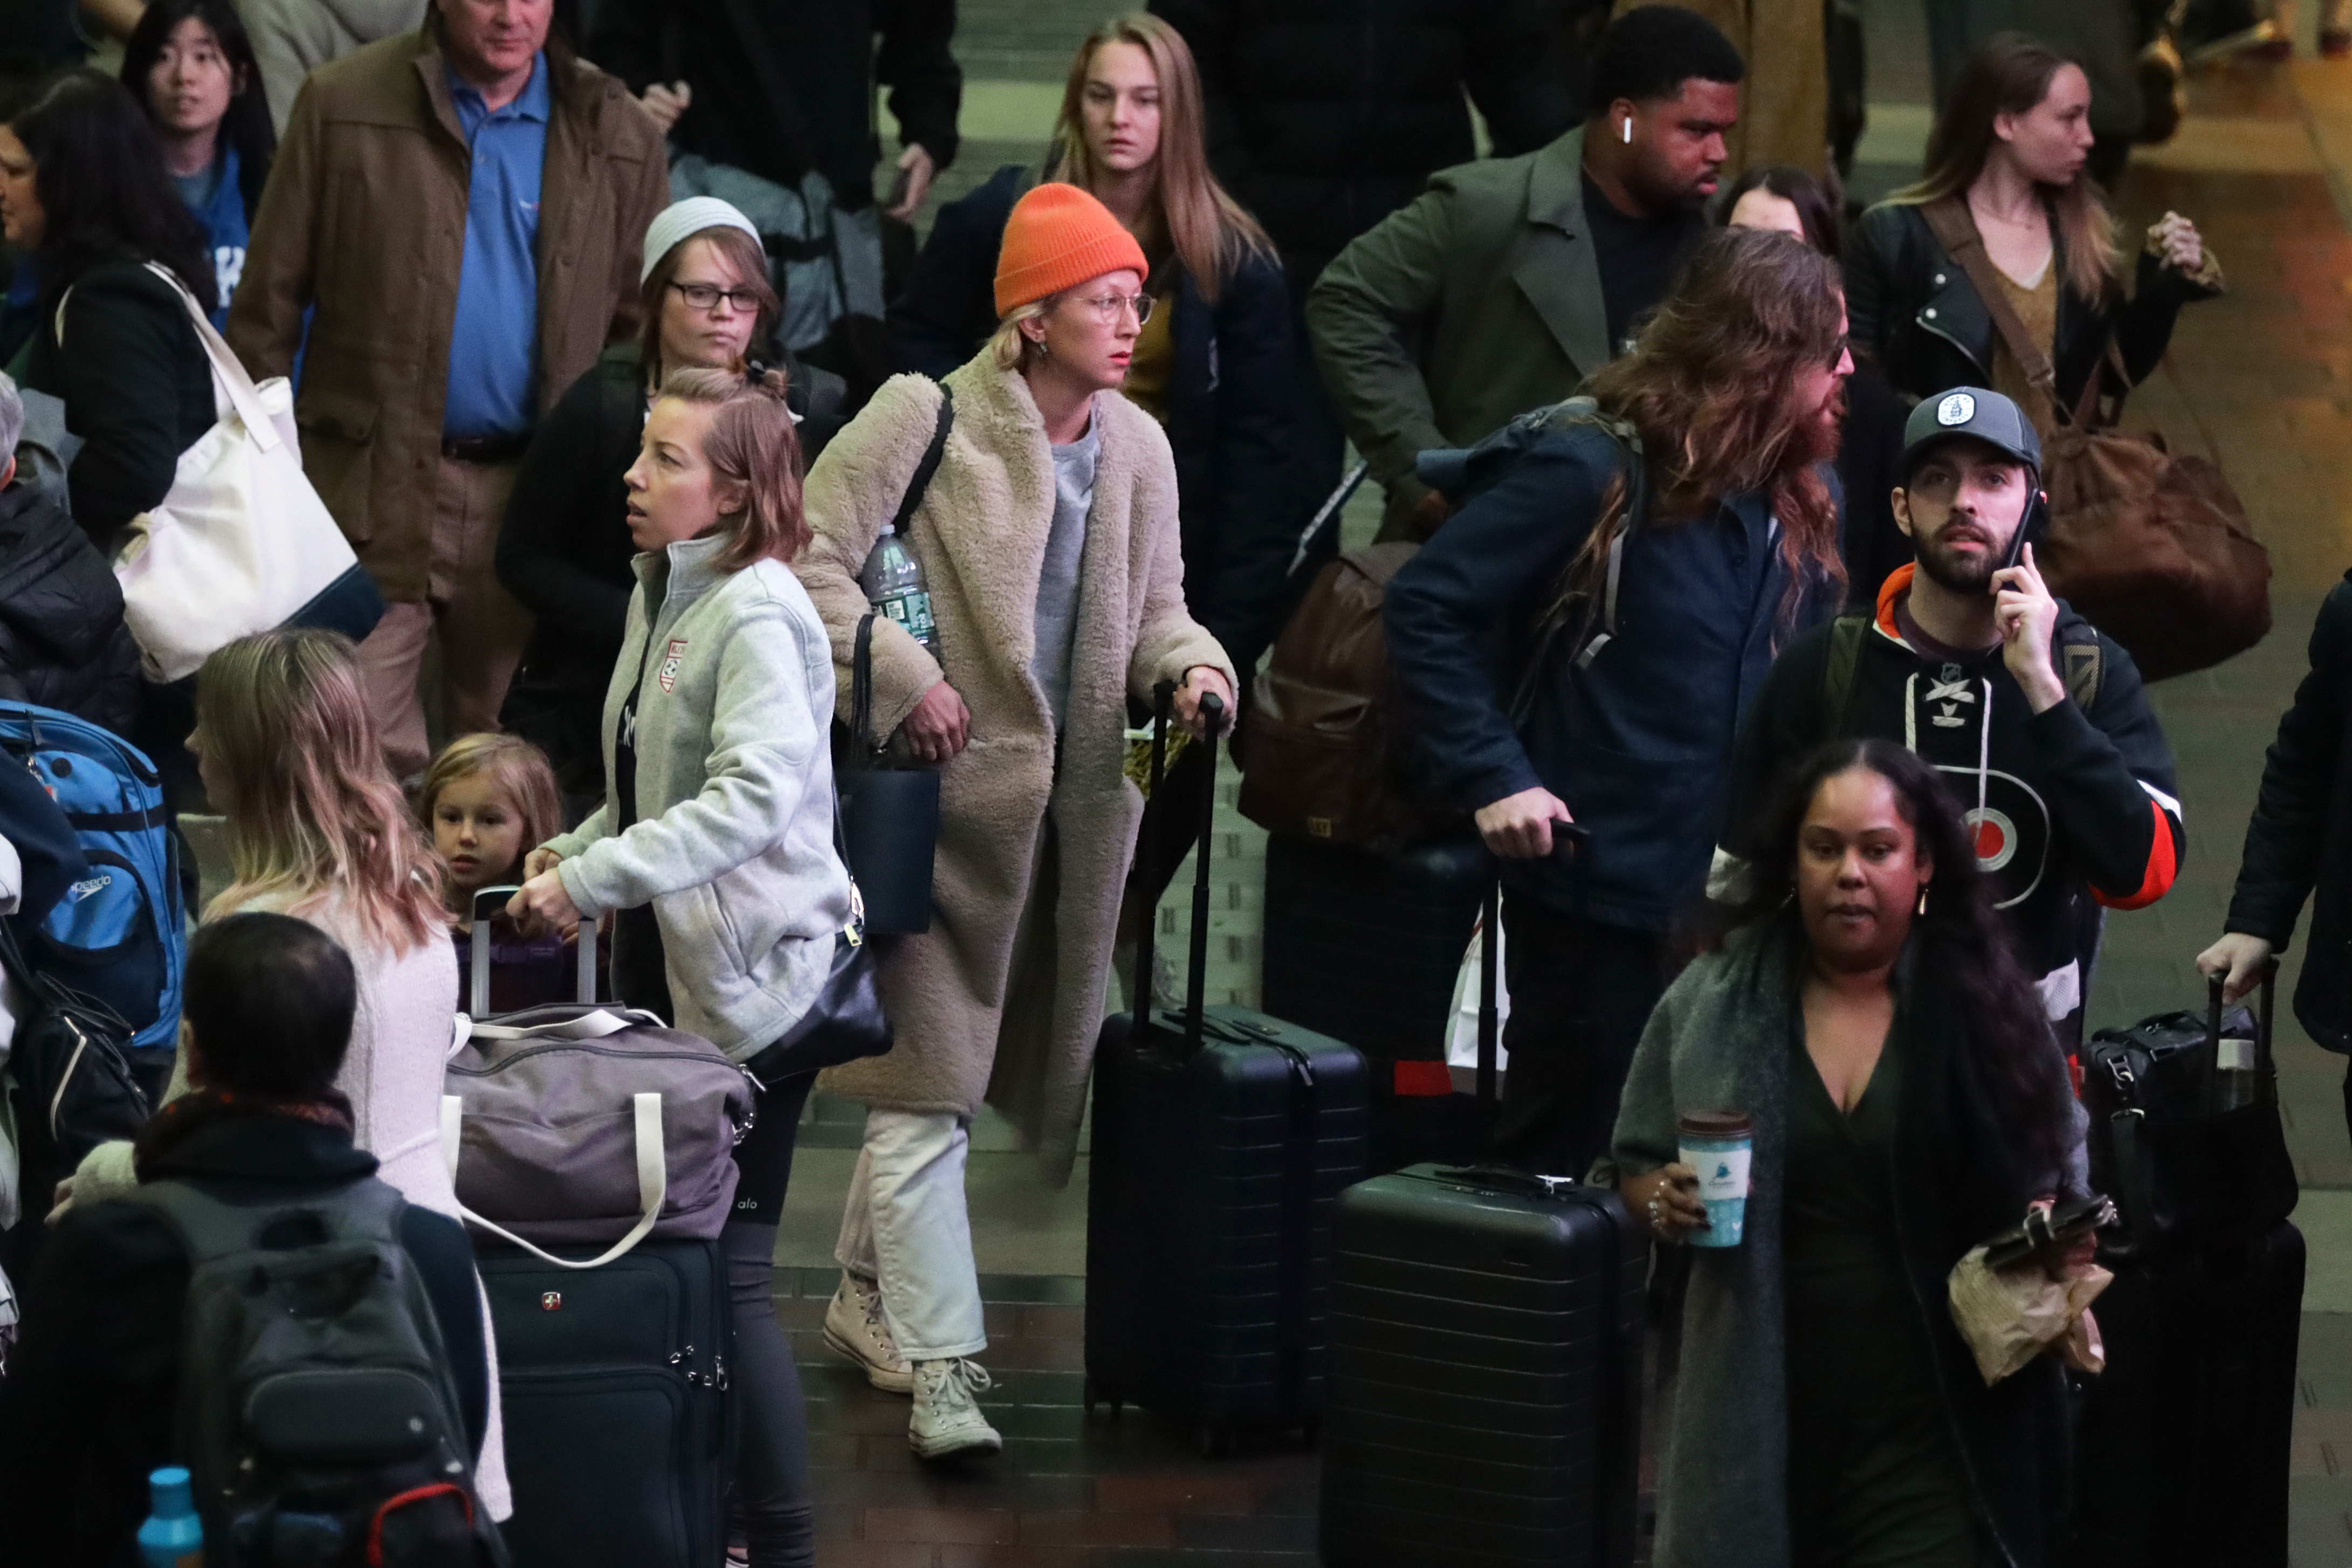 Holiday travelers walk with their luggages in the hall of Union Station November 27, 2019 in Washington, DC. (Alex Wong/Getty Images)